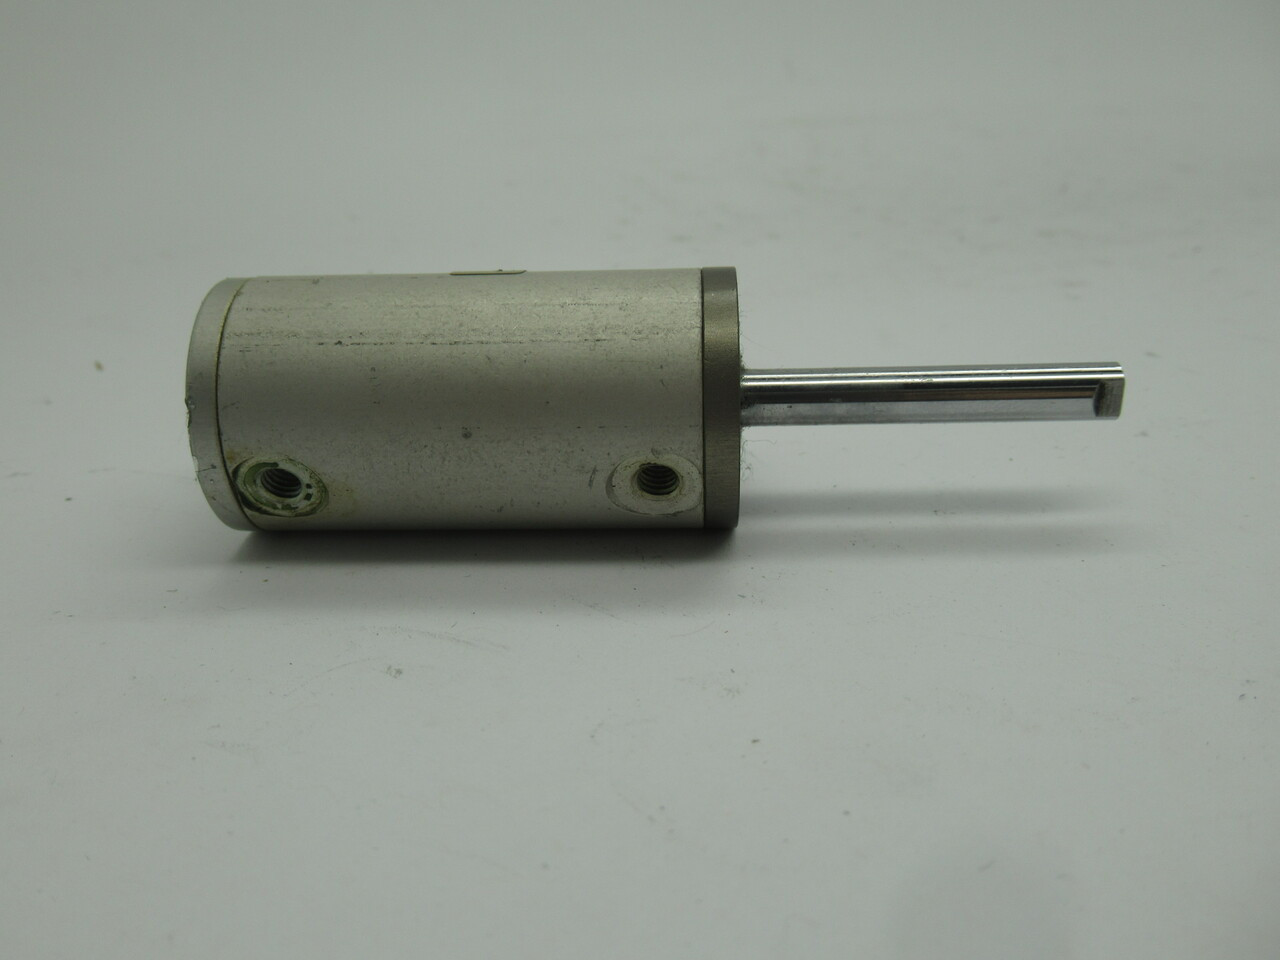 Fabco-Air J-5-X Double Acting Pneumatic Cylinder 1/2" Bore 1-1/2" Stroke USED